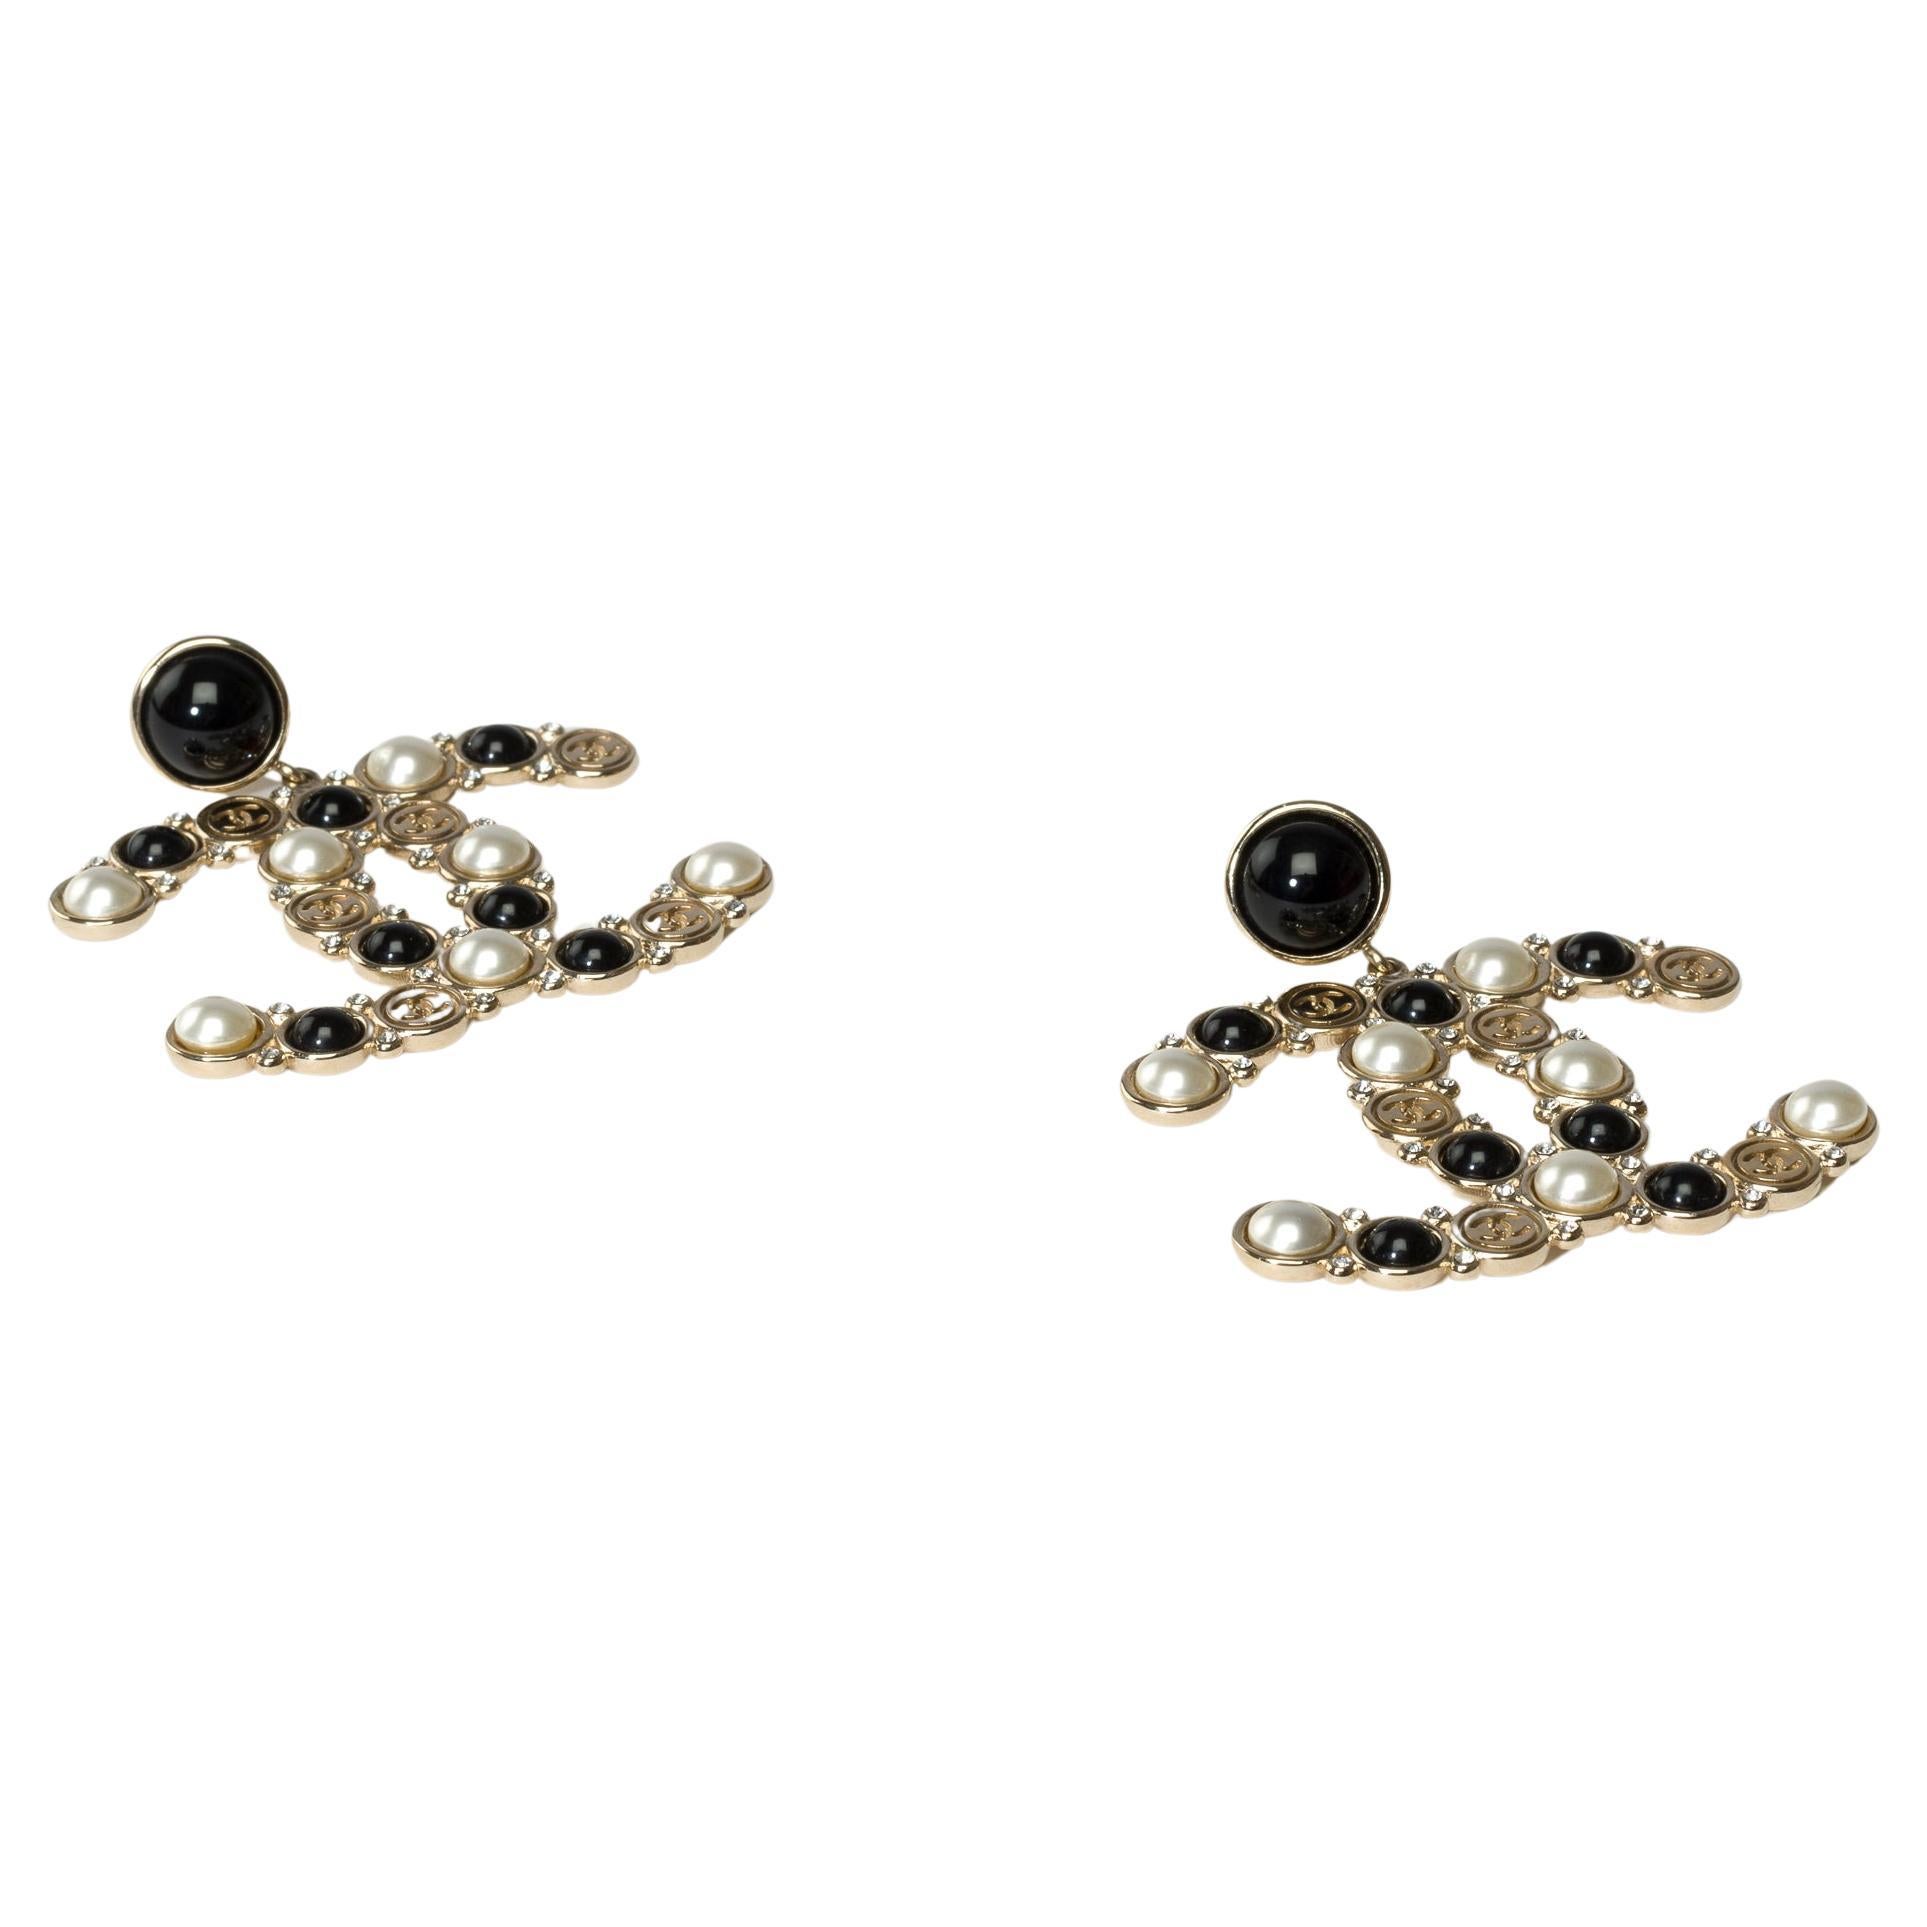 Superb​ ​Chanel​ ​CC​ ​earrings​ ​in​ ​silver​ ​metal​ ​topped​ ​with​ ​faux​ ​pearls,​ ​rhinestones​ ​and​ ​resin

Brand:​ ​Chanel
Tags:​ ​Earrings​ ​For​ ​Men​ ​
Material:​ ​Silver​ ​metal,​ ​faux​ ​pearls,​ ​rhinestones​ ​and​ ​resin
Dimensions:​